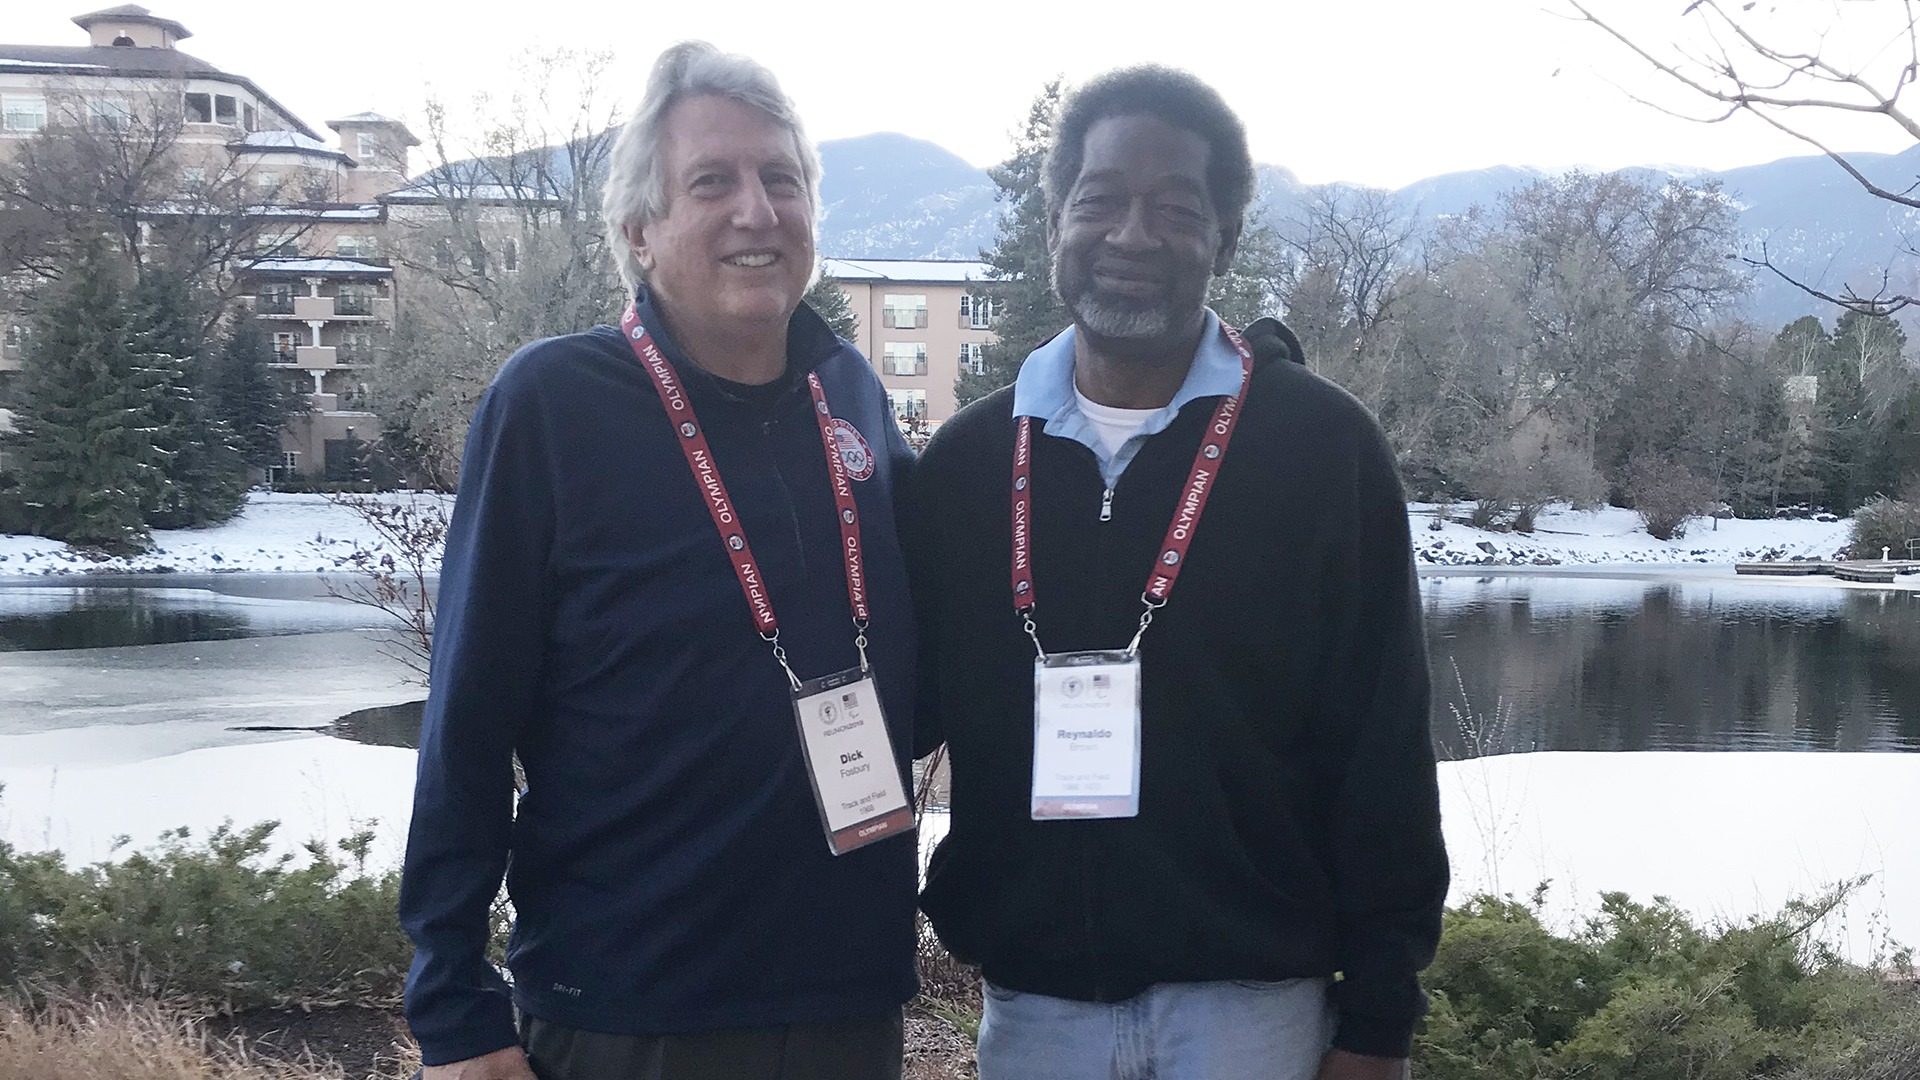 Dick Fosbury and Reynaldo Brown pose for a photo outside the Broadmoor